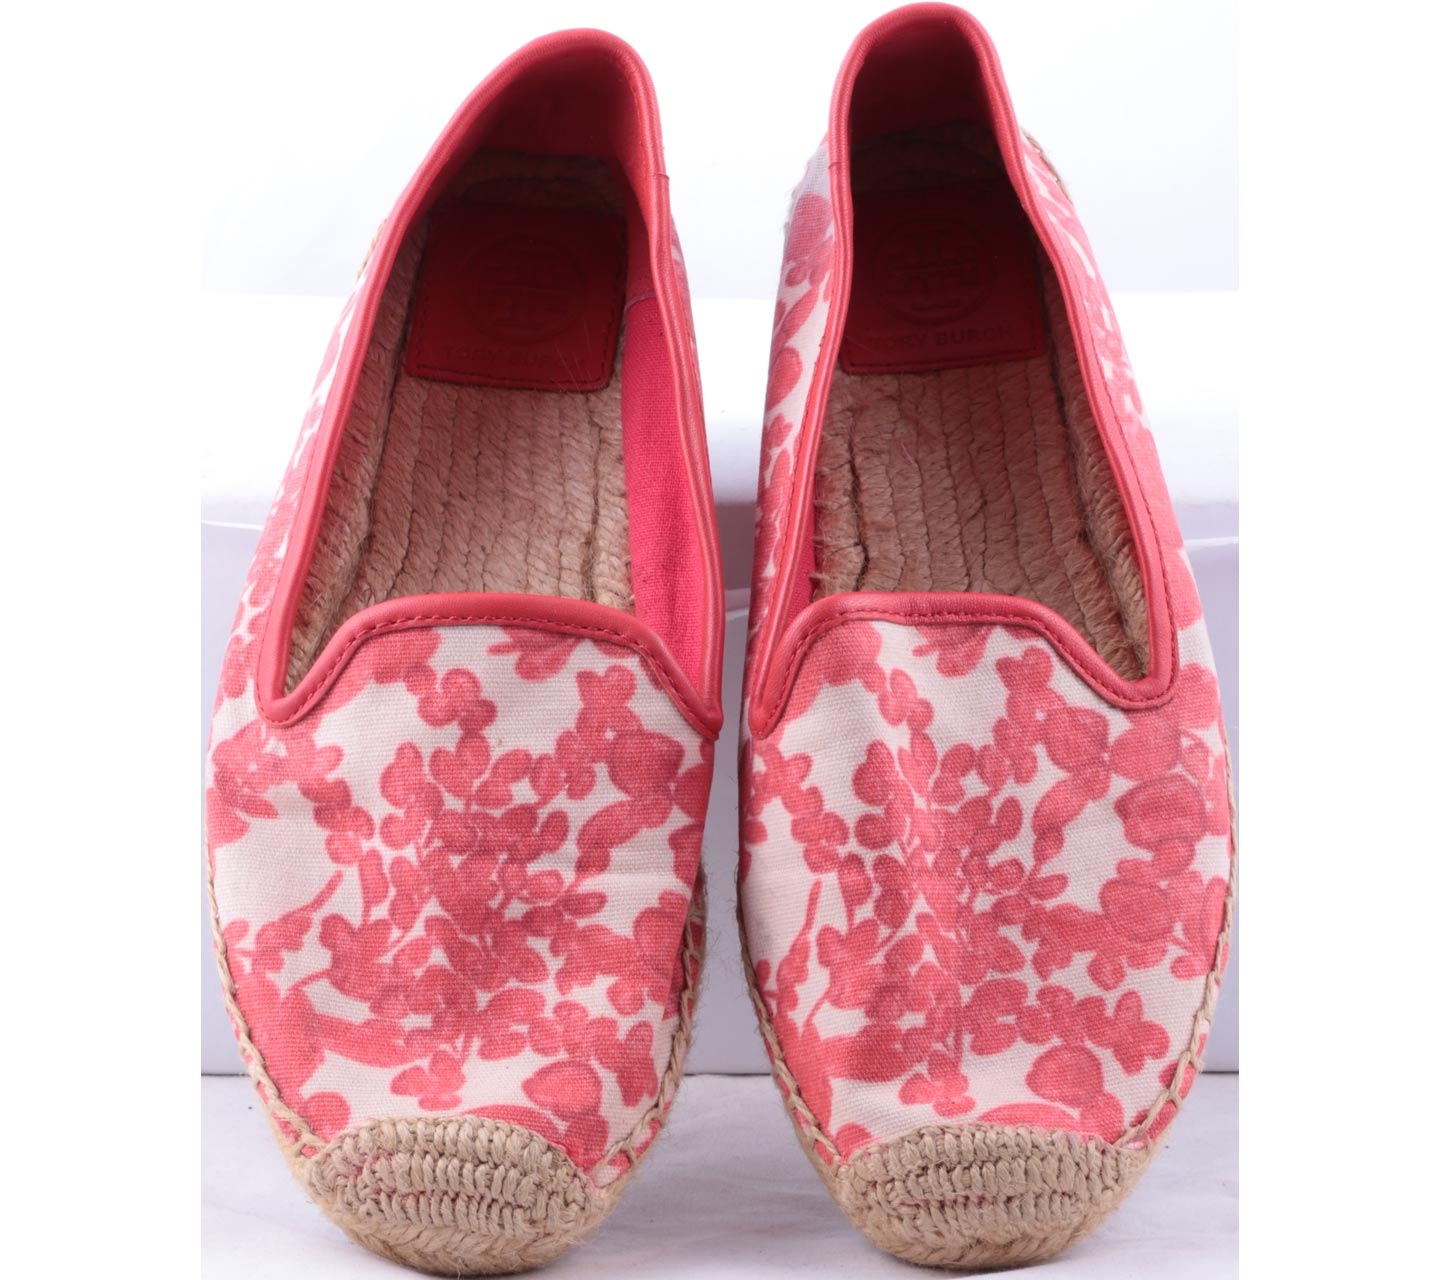 Tory Burch Red And Cream Floral Flats